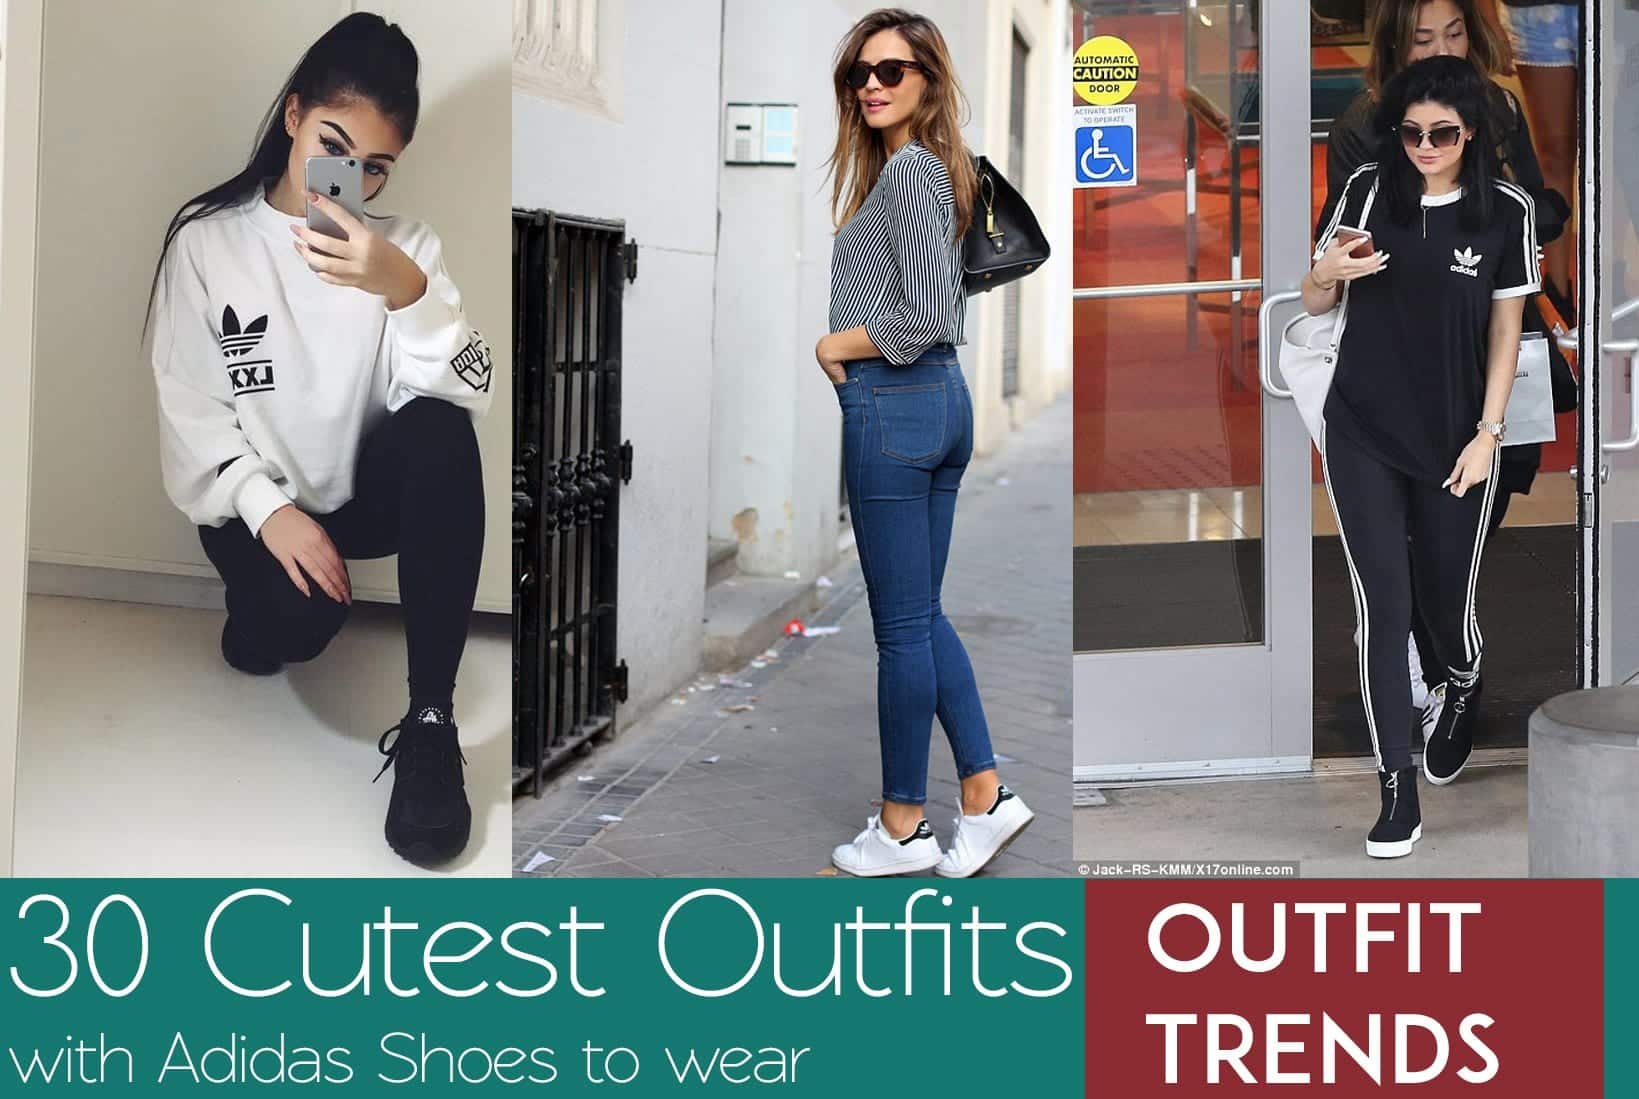 featured-image-for-outfit-trends